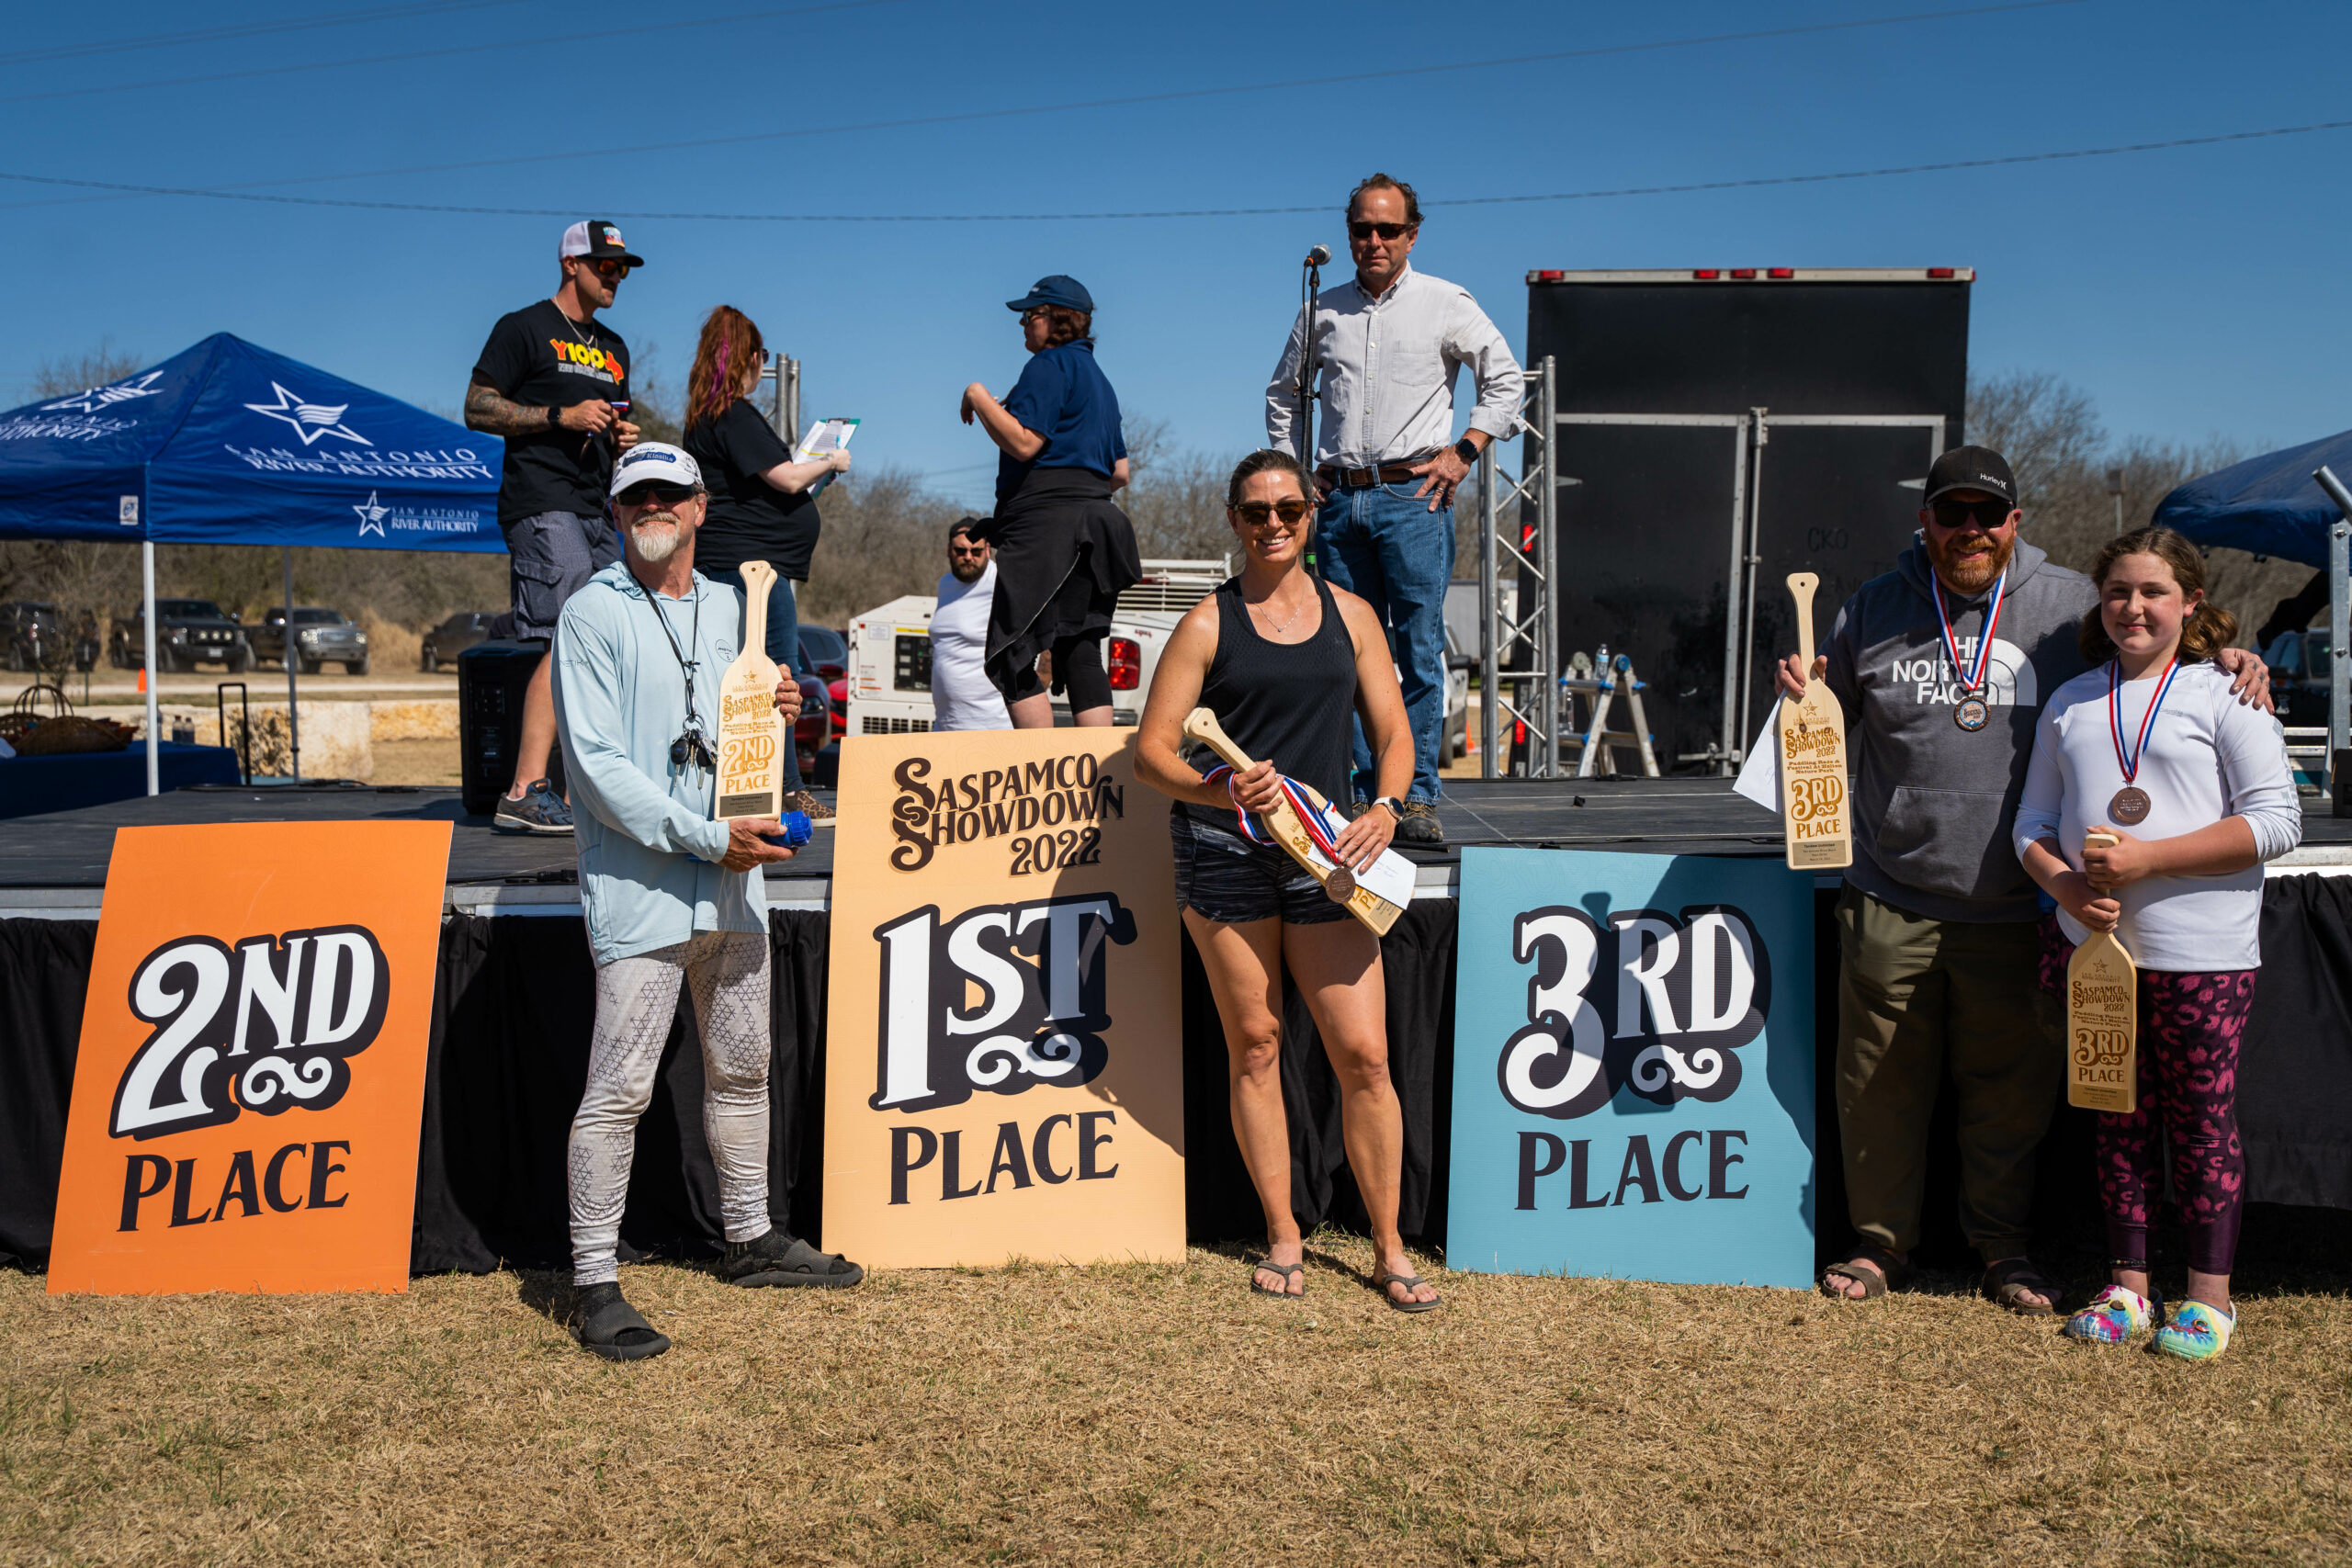 Winner pose next to the stage for the SASPAMCO Showdown Paddling Race. 